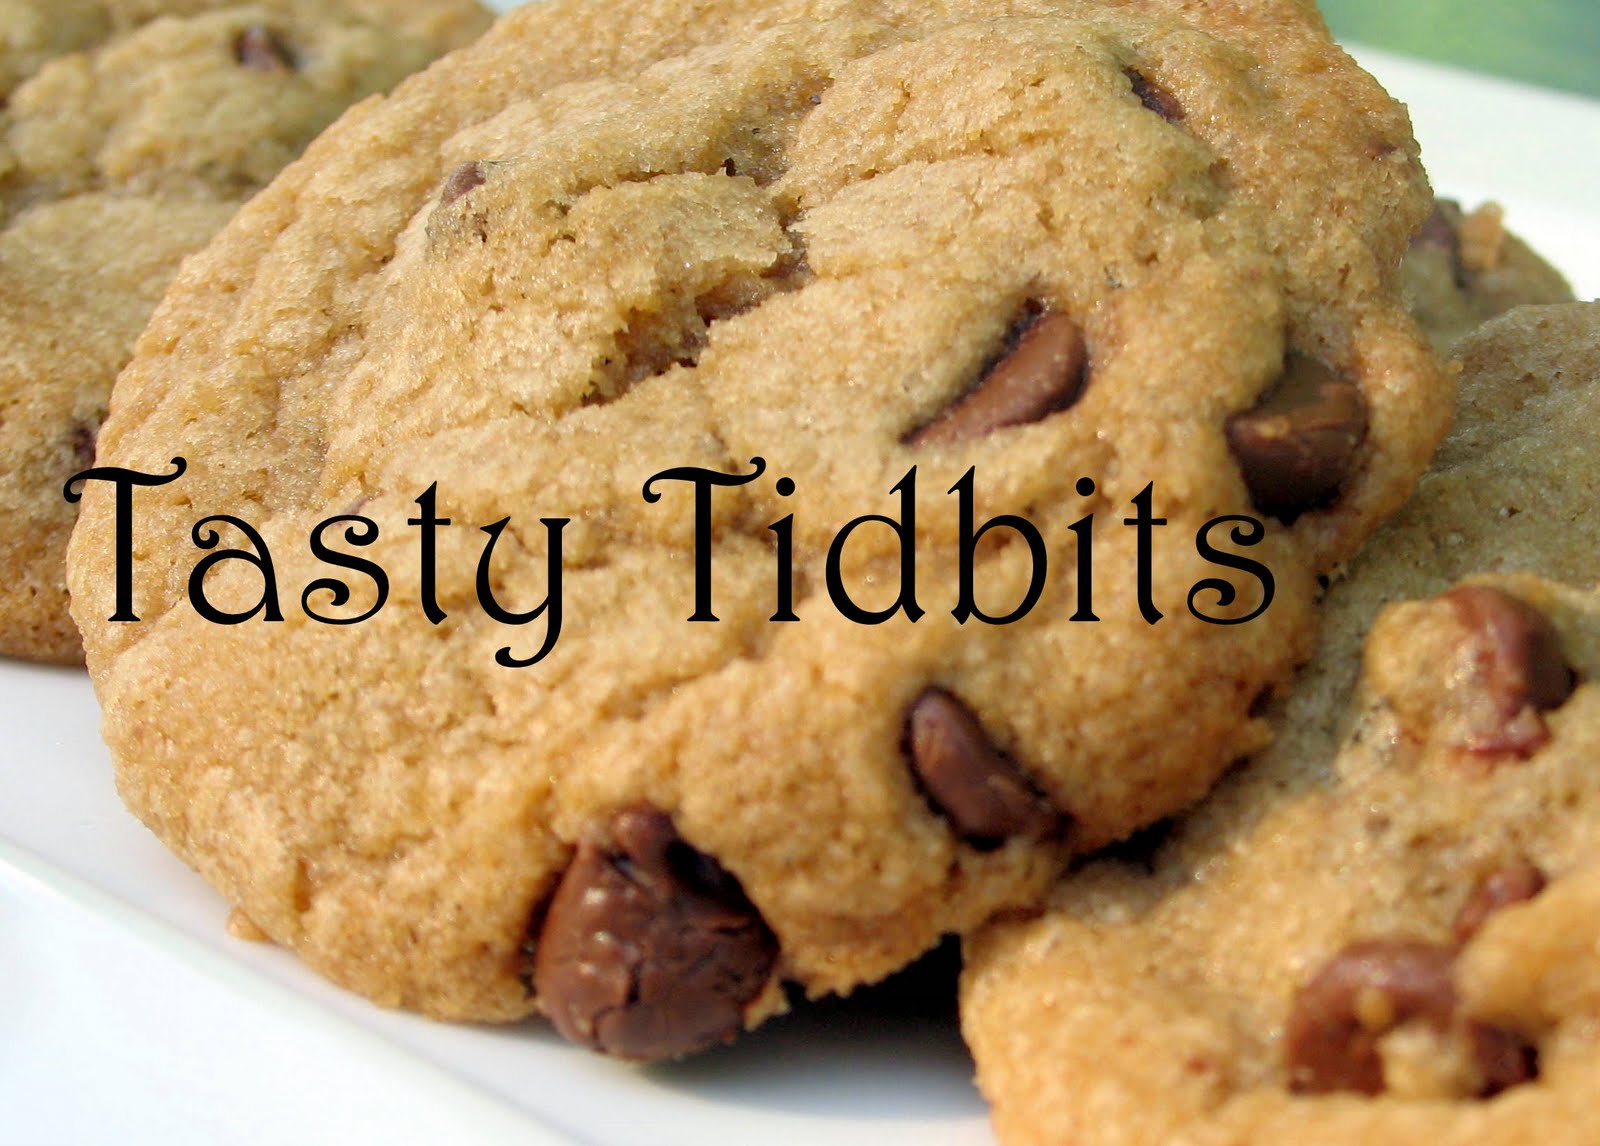 Tasty Tidbits - Email, Phone Numbers, Public Records & Criminal ...